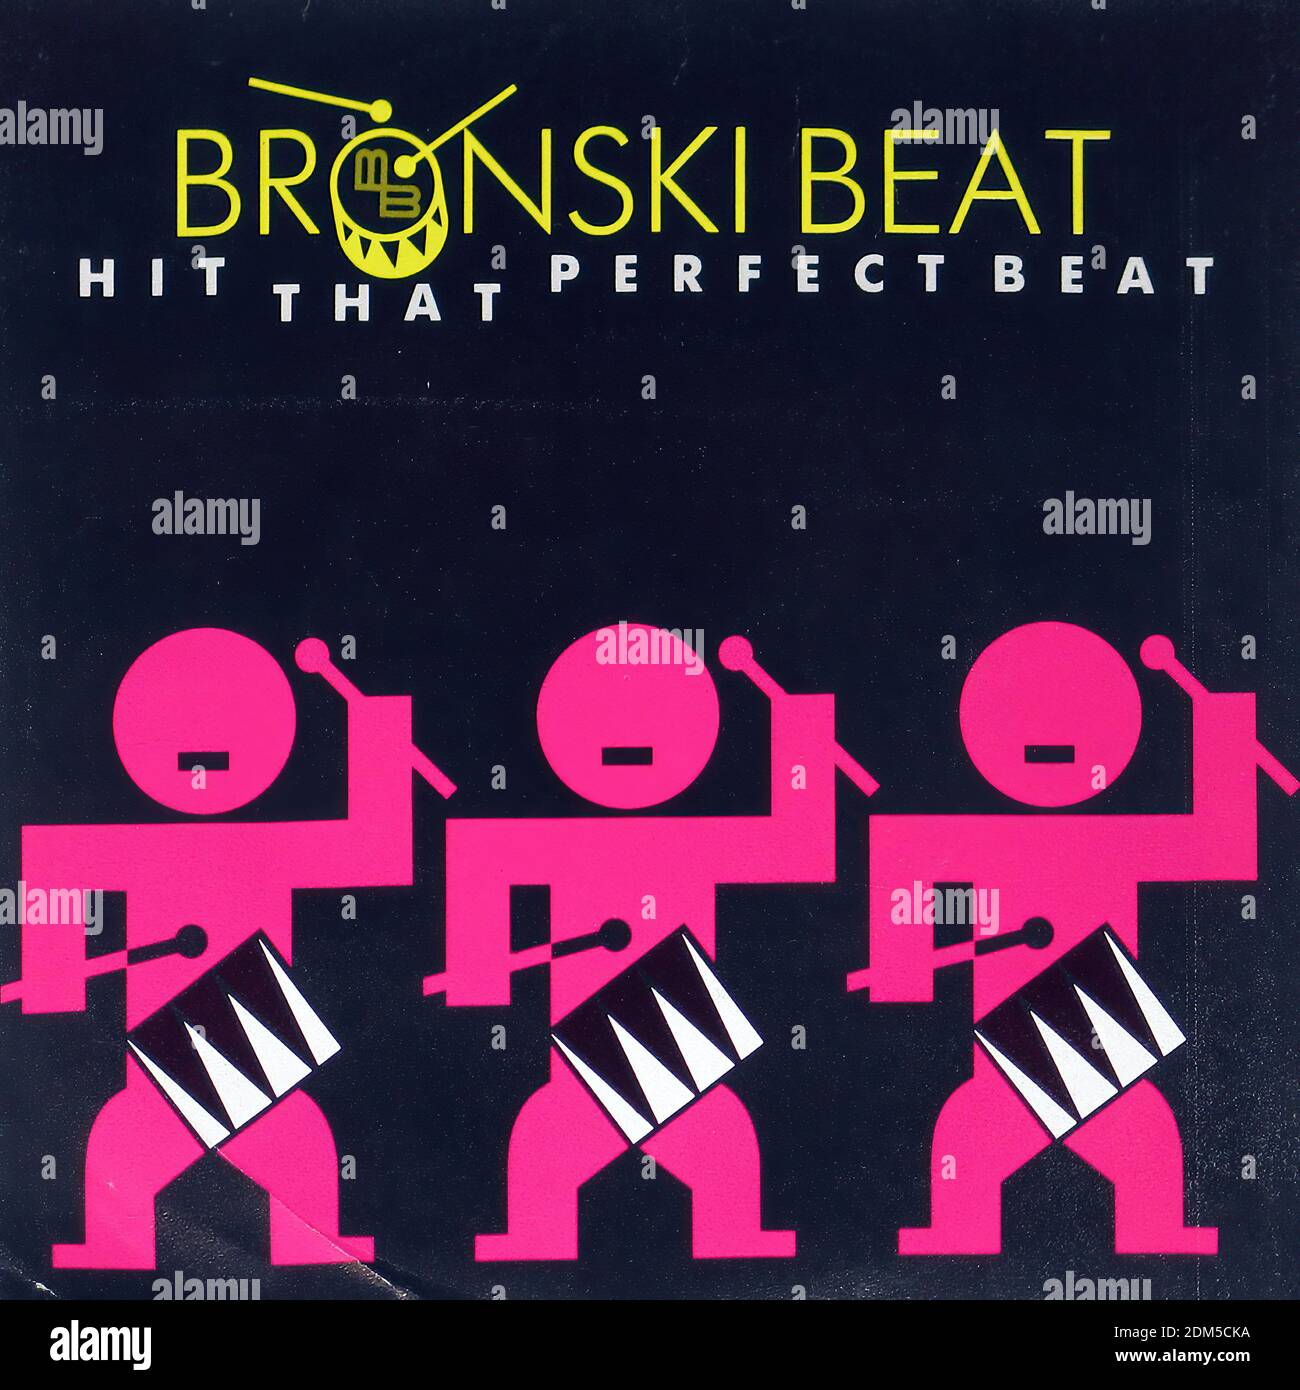 Bronski Beat Hit Beat Gave You Everything - Vinyl Record Cover Stock Photo - Alamy